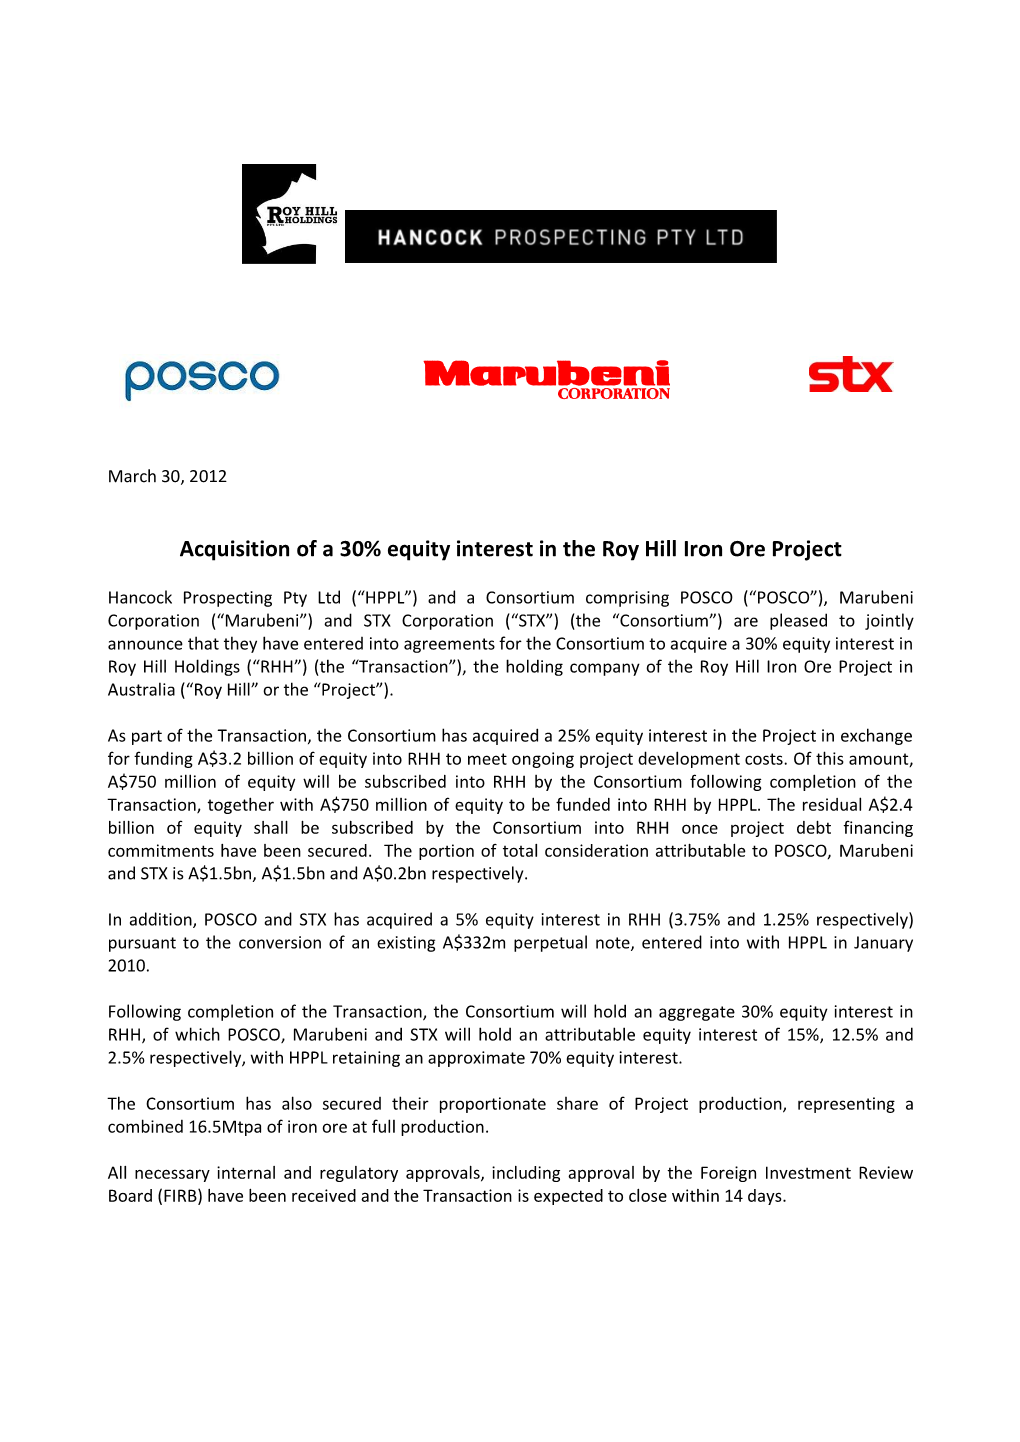 Acquisition of a 30% Equity Interest in the Roy Hill Iron Ore Project